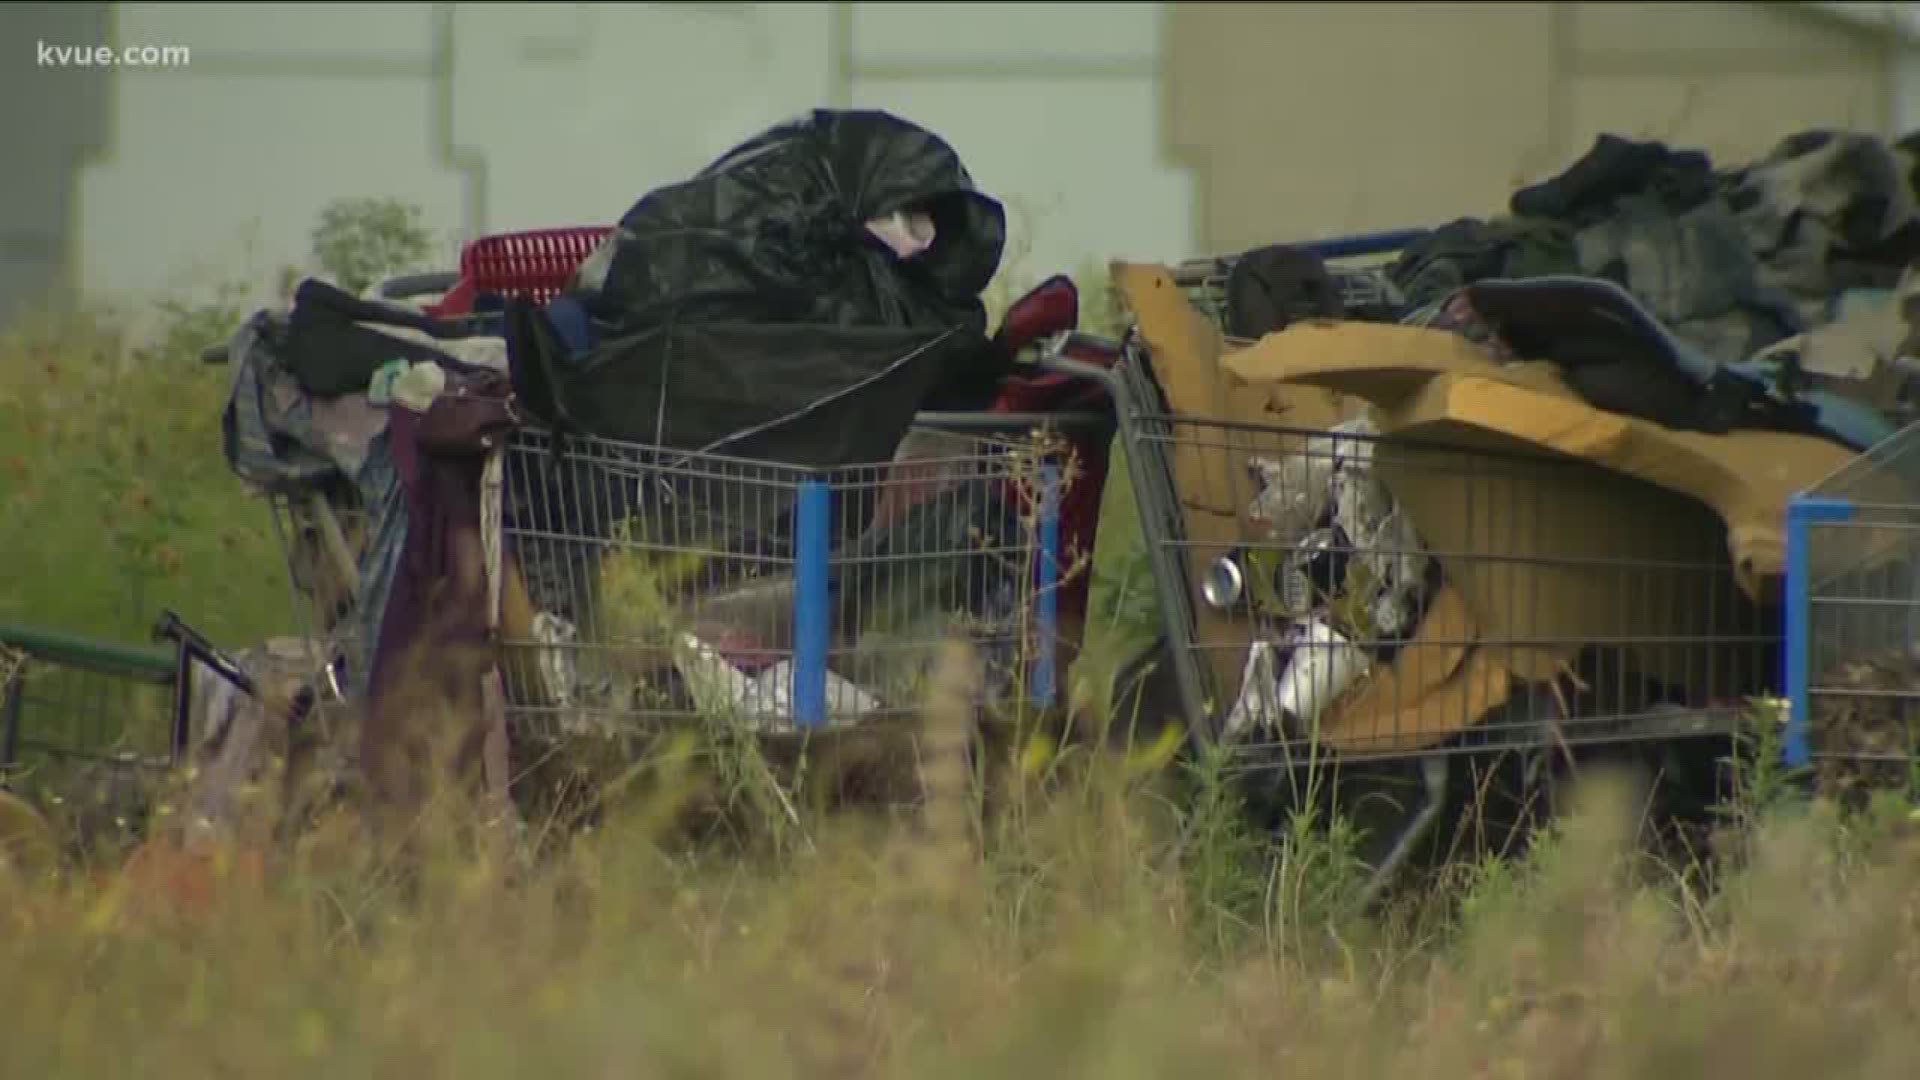 A late night turned into an early morning for the Austin City Council. They approved changing three laws that some say criminalized homelessness.